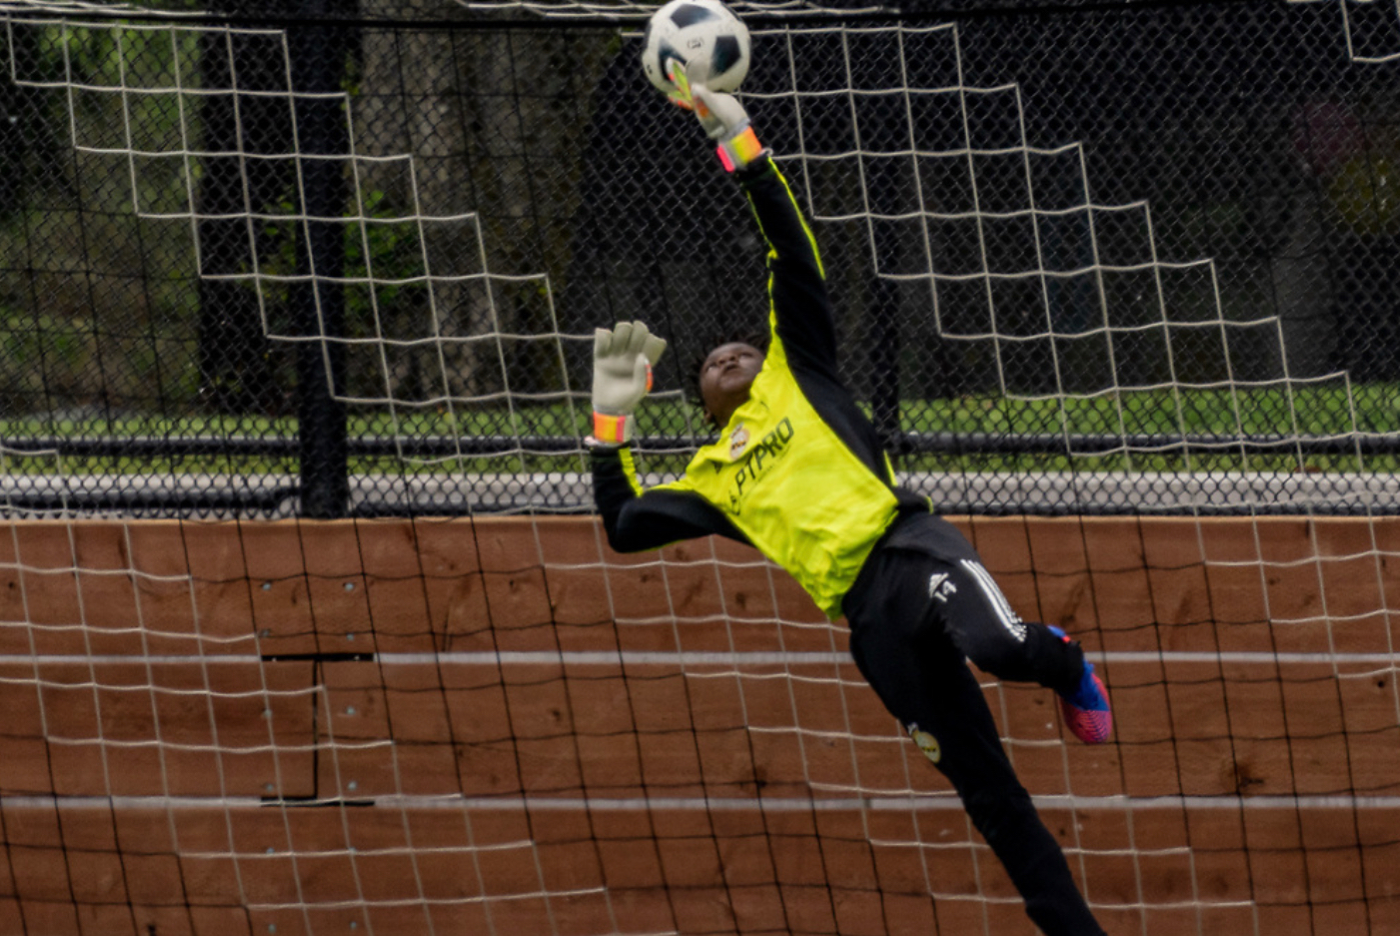 Male soccer goalkeeper in Black and yellow uniform diving to save a soccer ball from under the crossbar of the goal. 